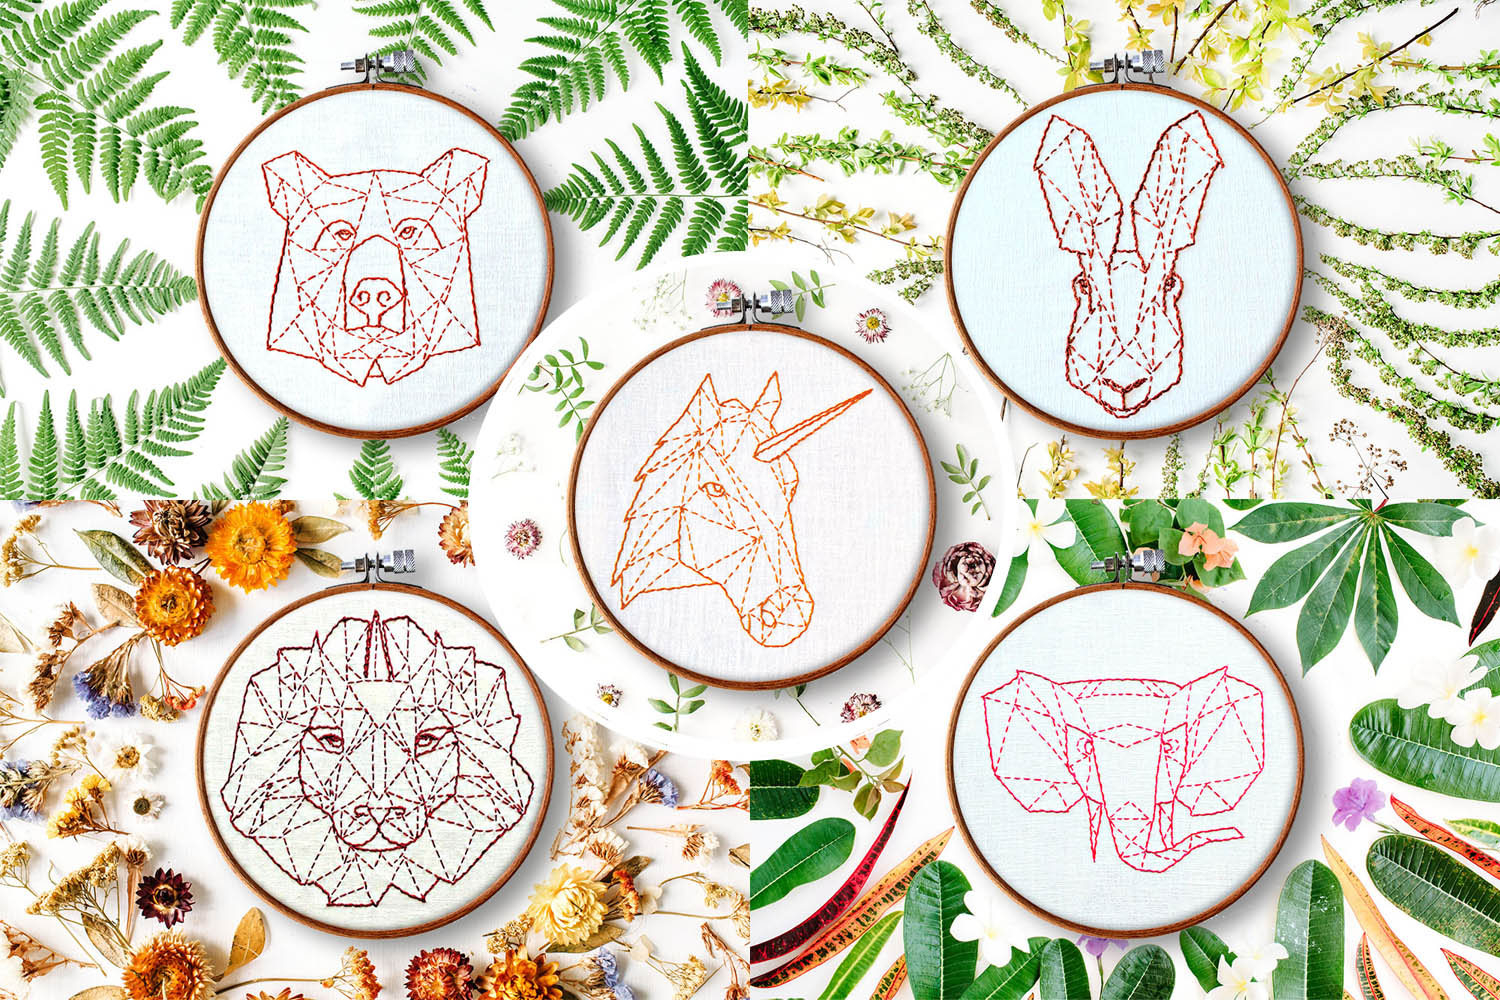 Hand Embroidery Patterns For Beginners Modern Hand Embroidery Patterns Geometric Animals Beginner Embroidery Embroidery Ideas Contemporary Embroidery Rustic Home Decor